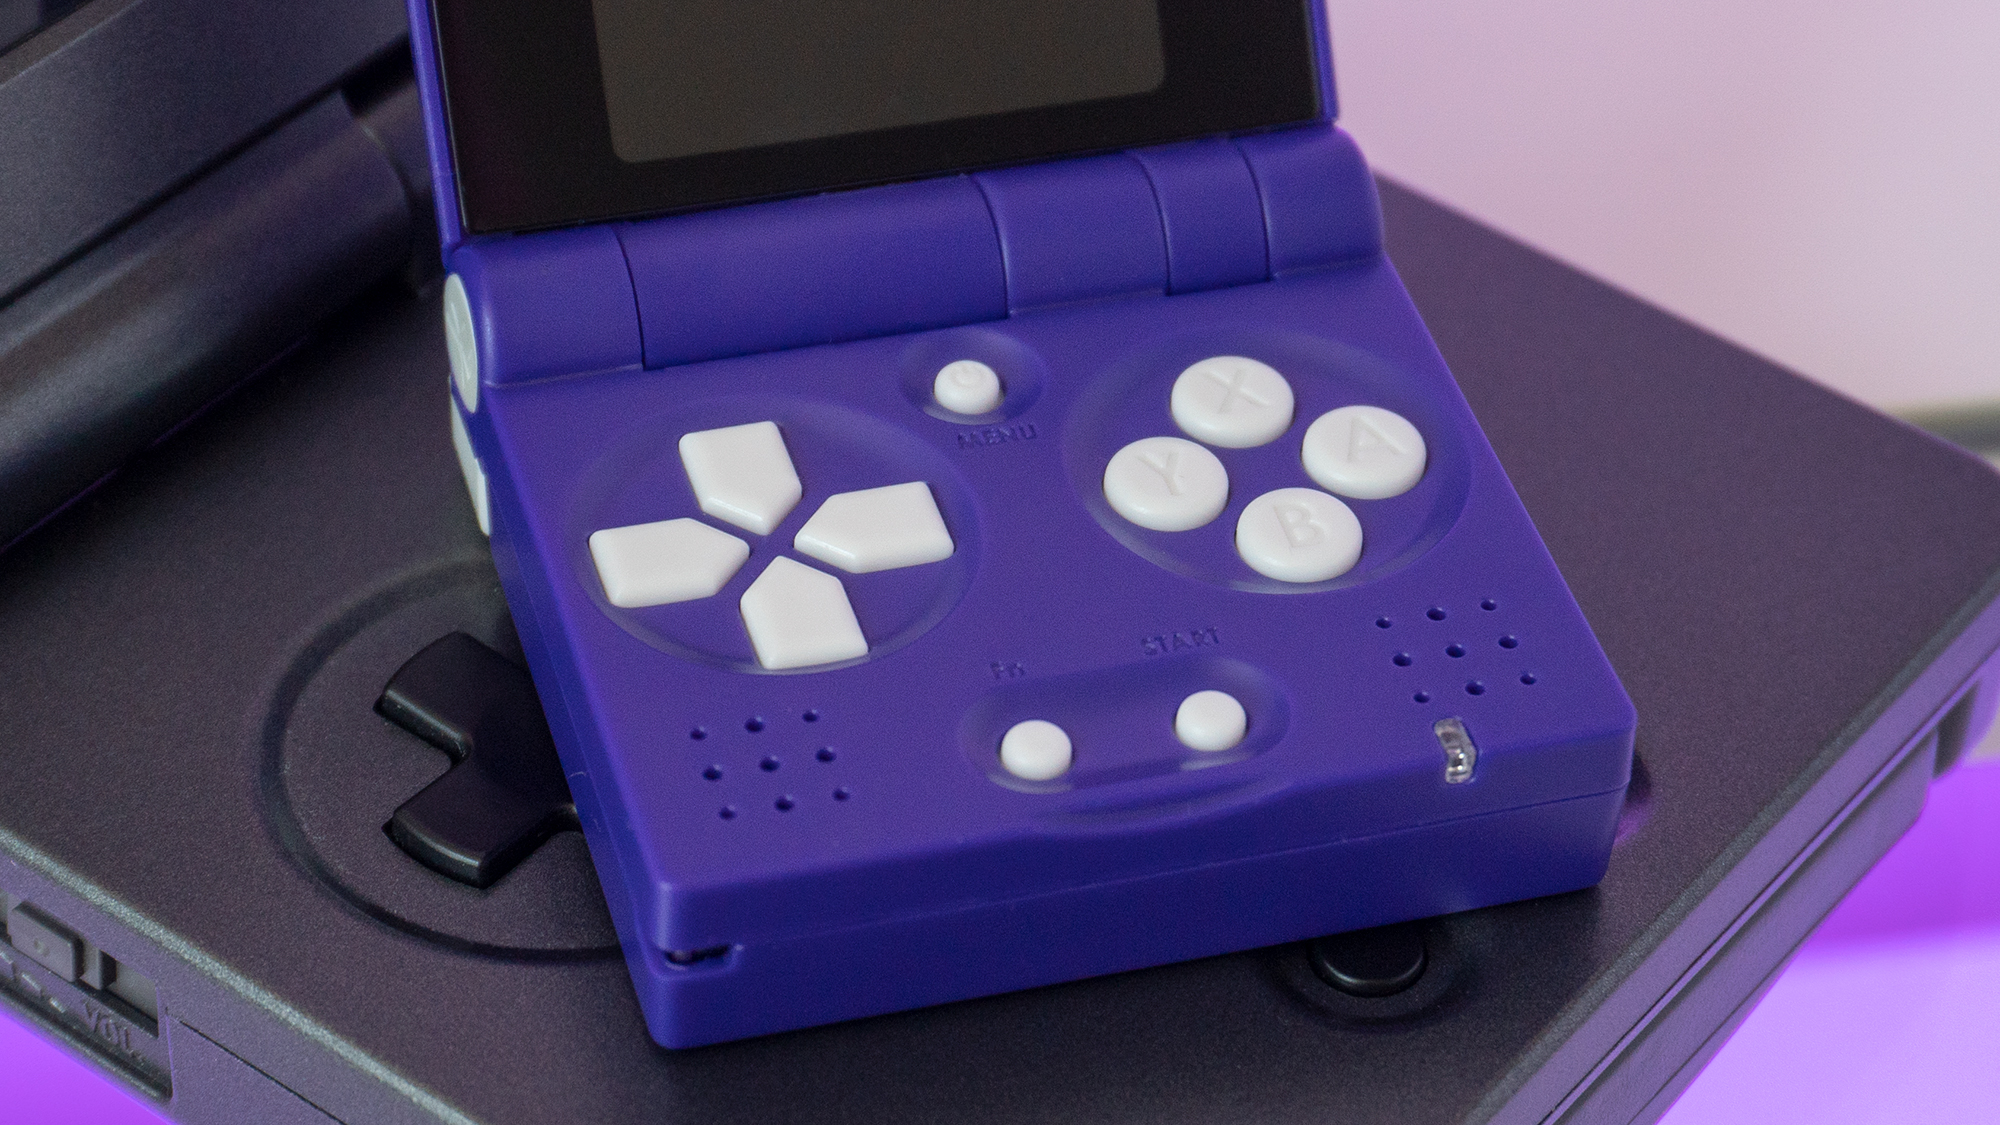 It's small, but the FunKey S still manages to include all the buttons you'll need for a host of different consoles. (Photo: Andrew Liszewski/Gizmodo)